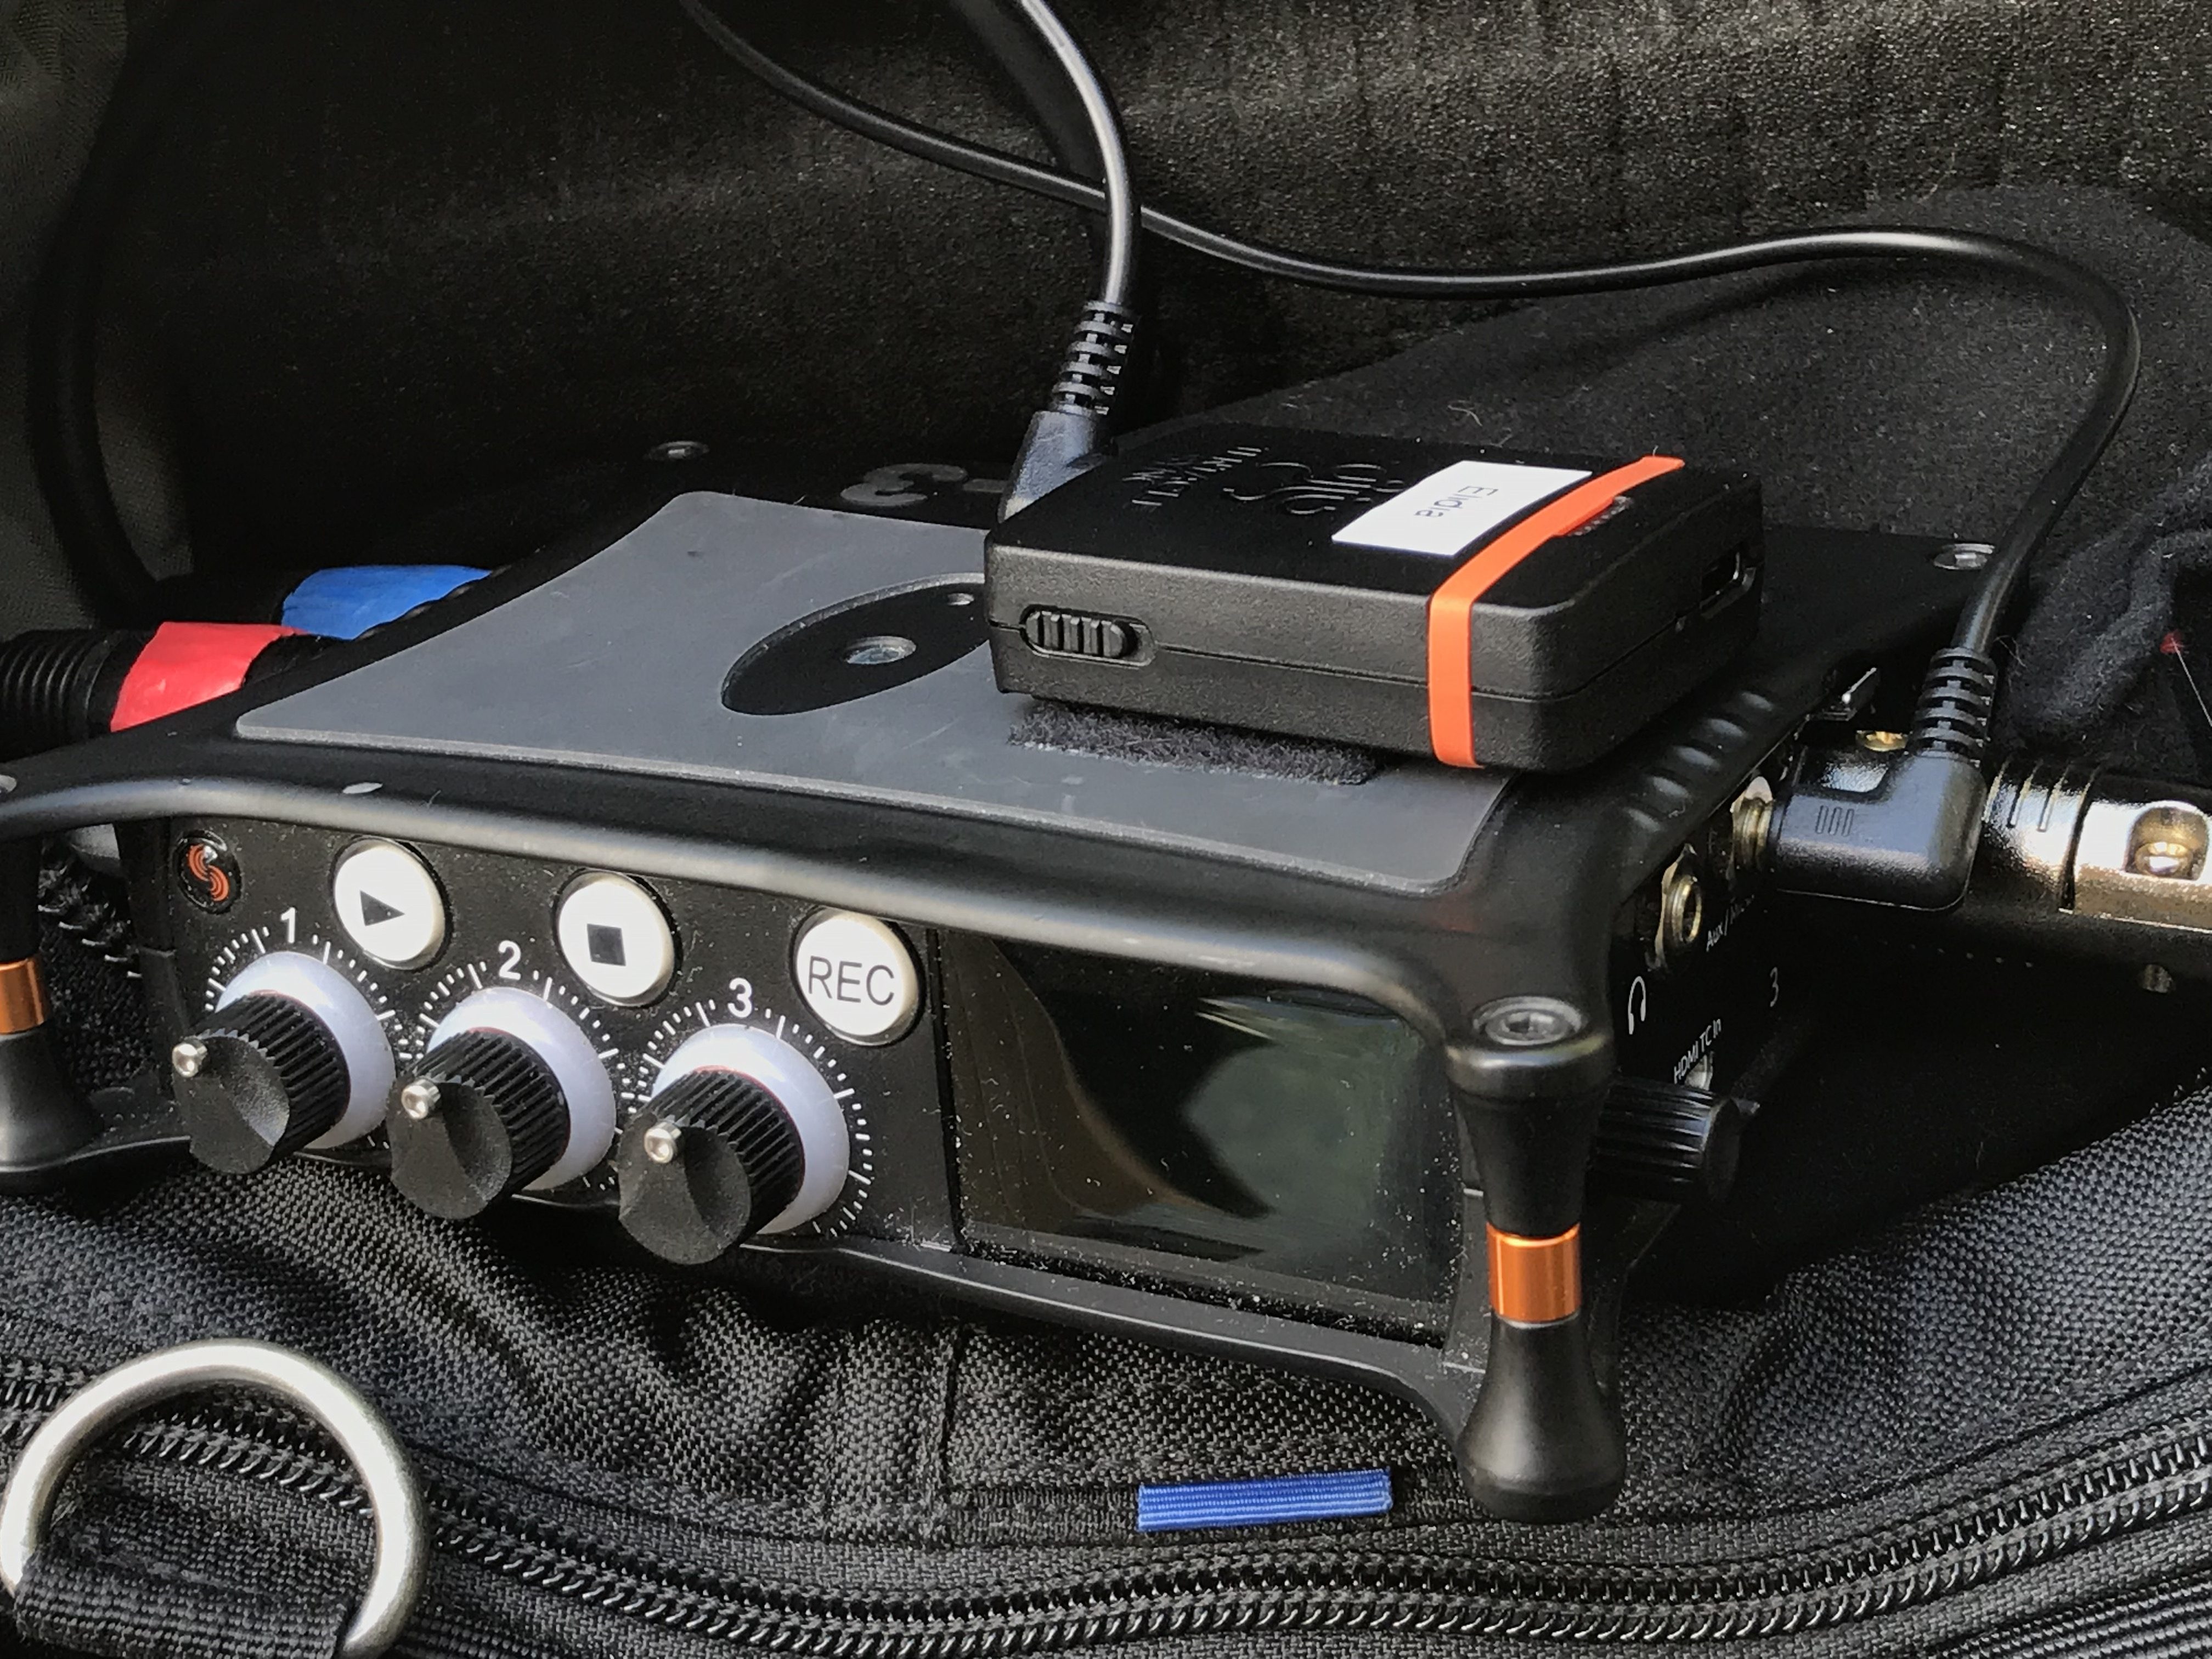 Tentacle sync and sound devices mixpre 3